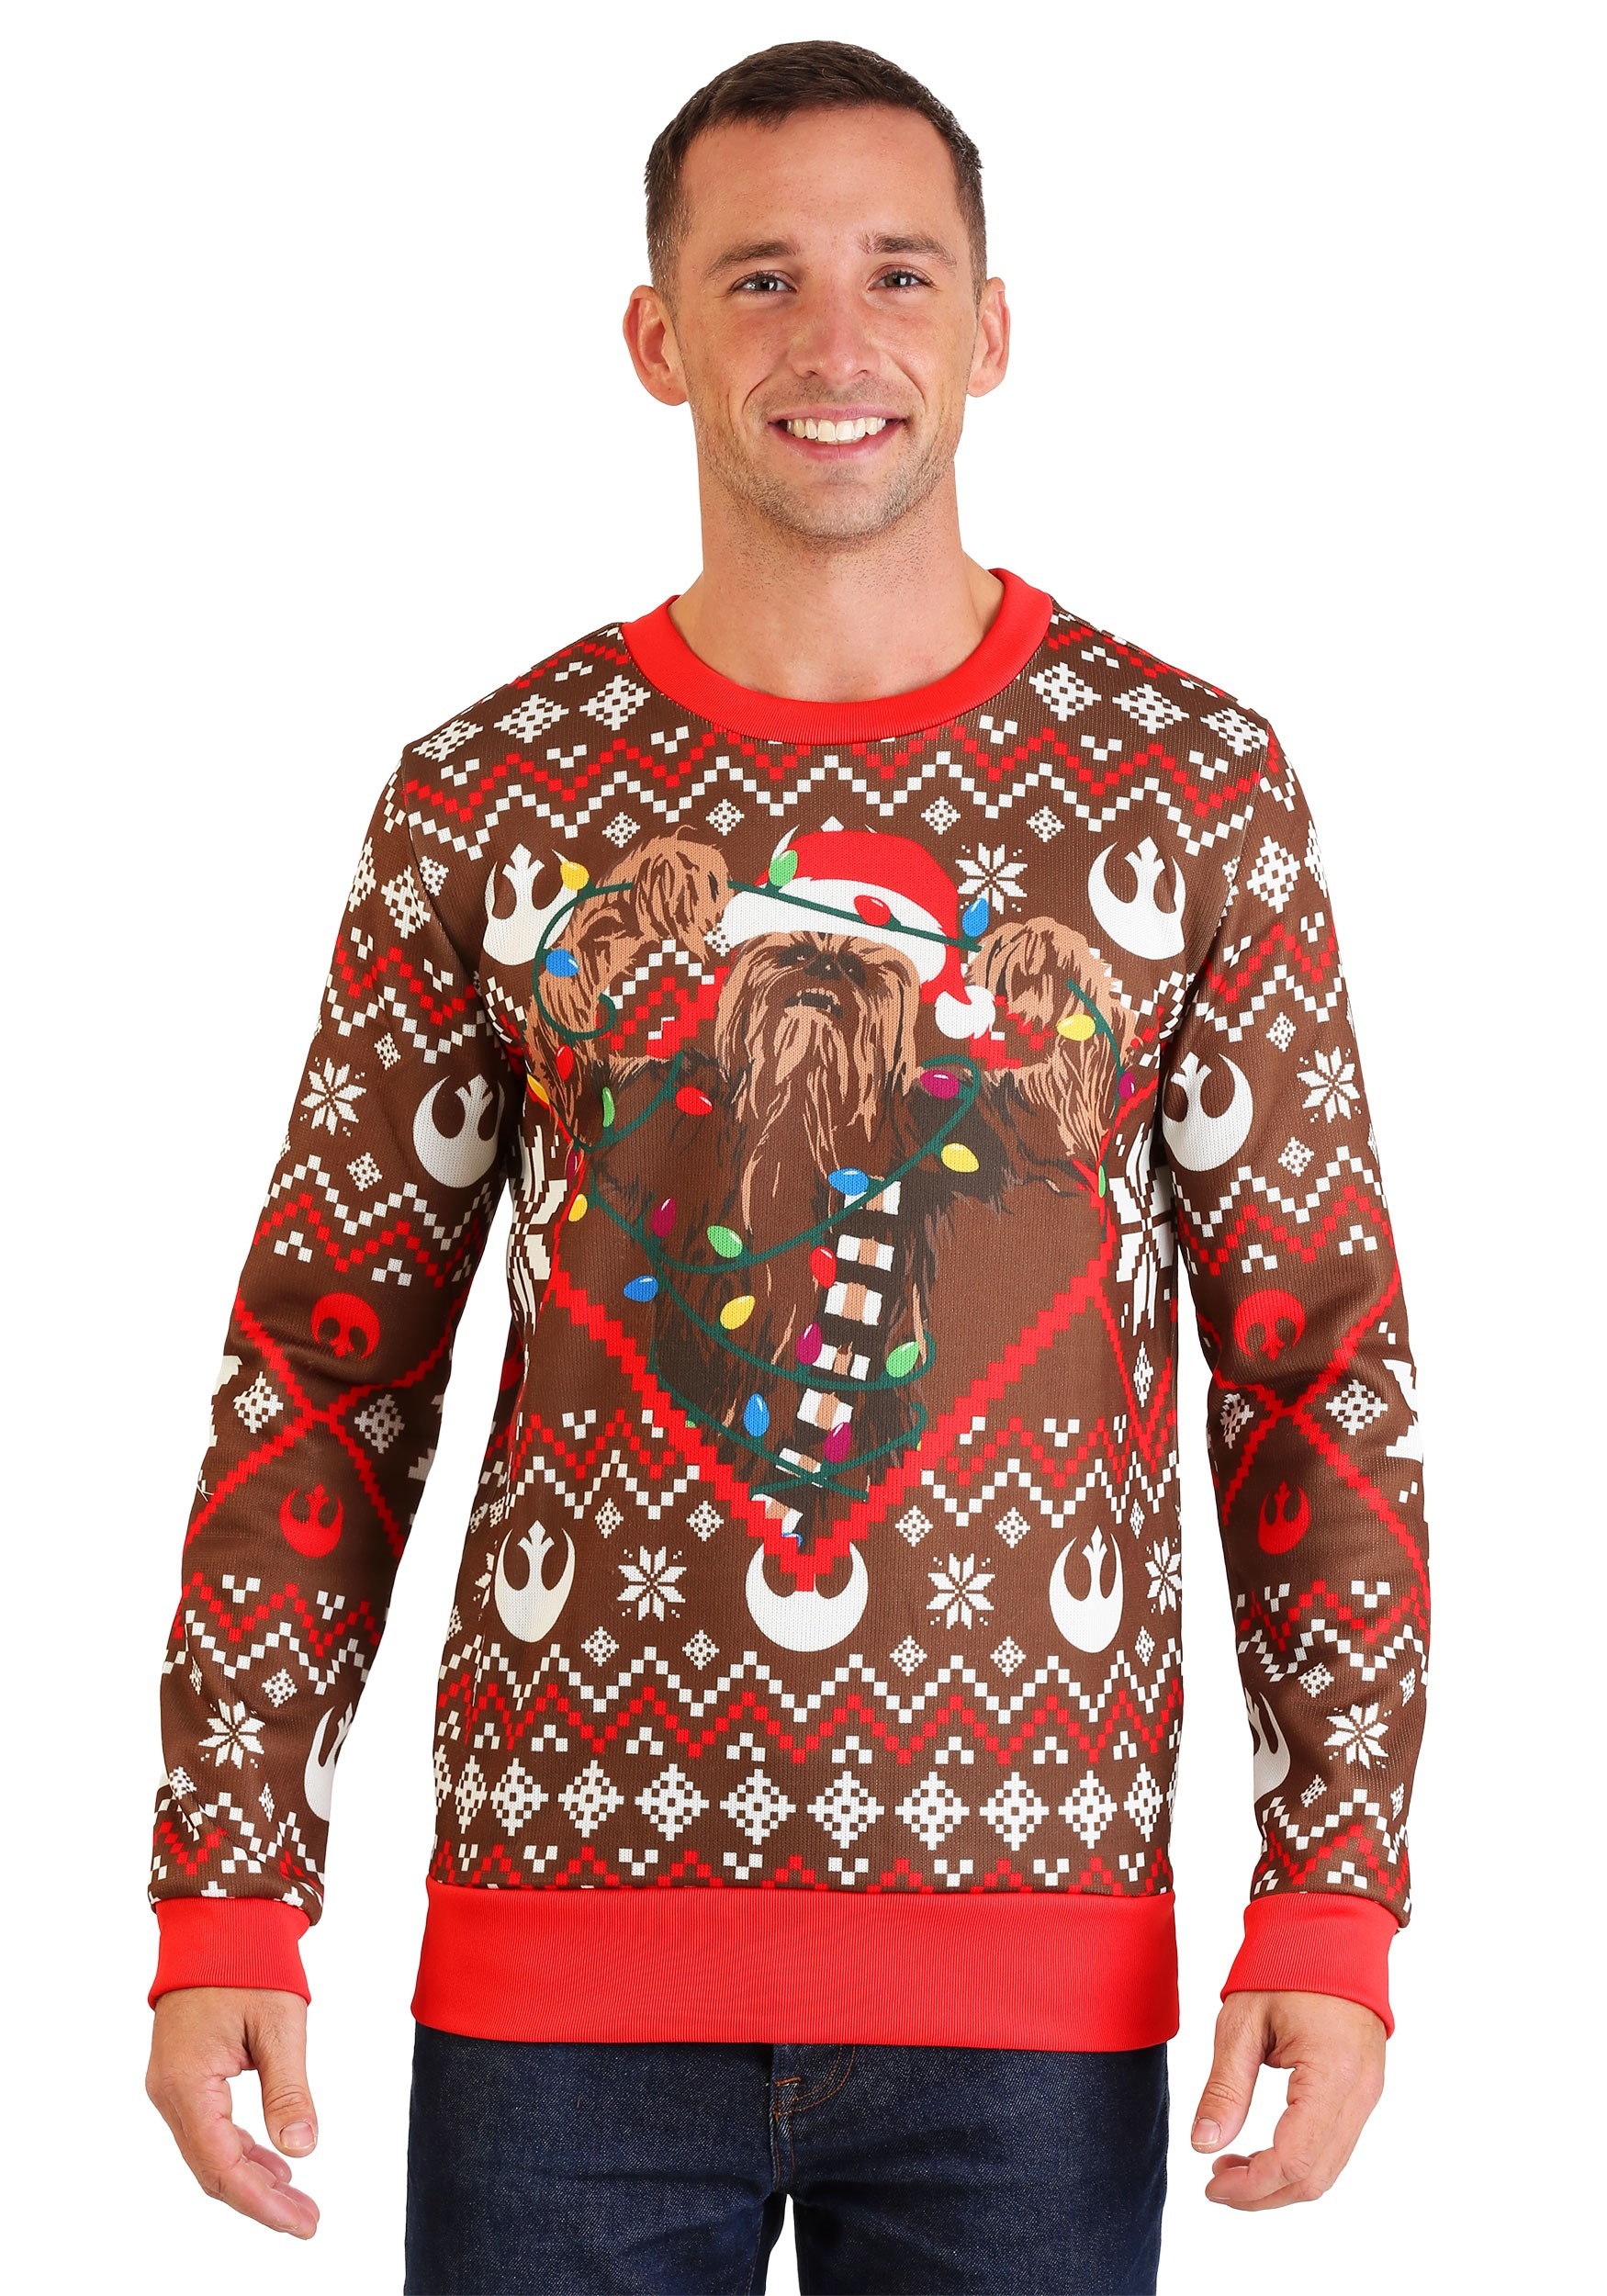 Star Wars Chewbacca Ugly Christmas Sweater for Adults